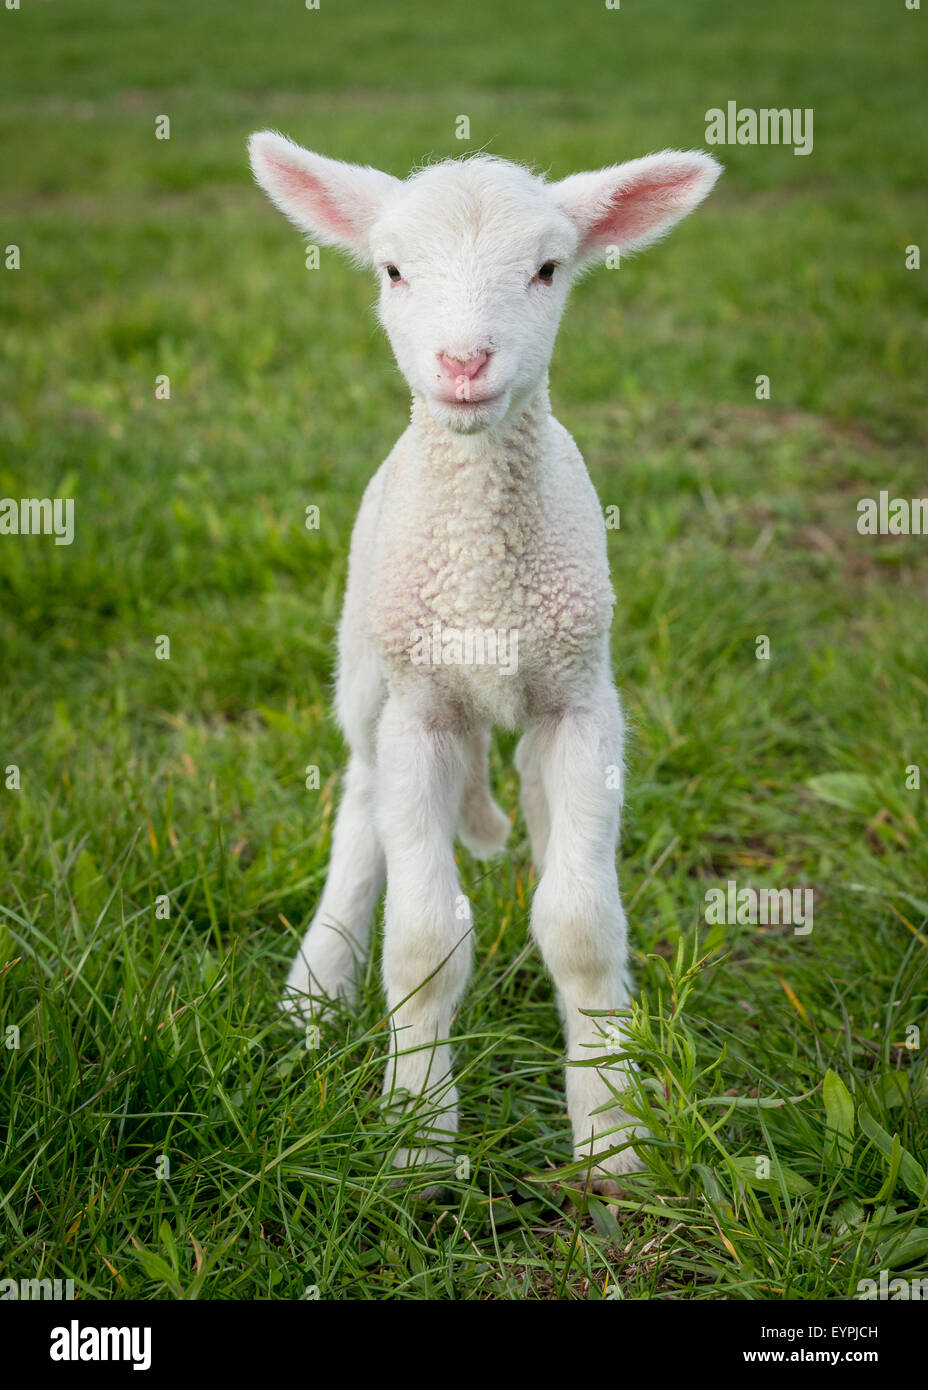 a young white lamb in a field of grass Stock Photo